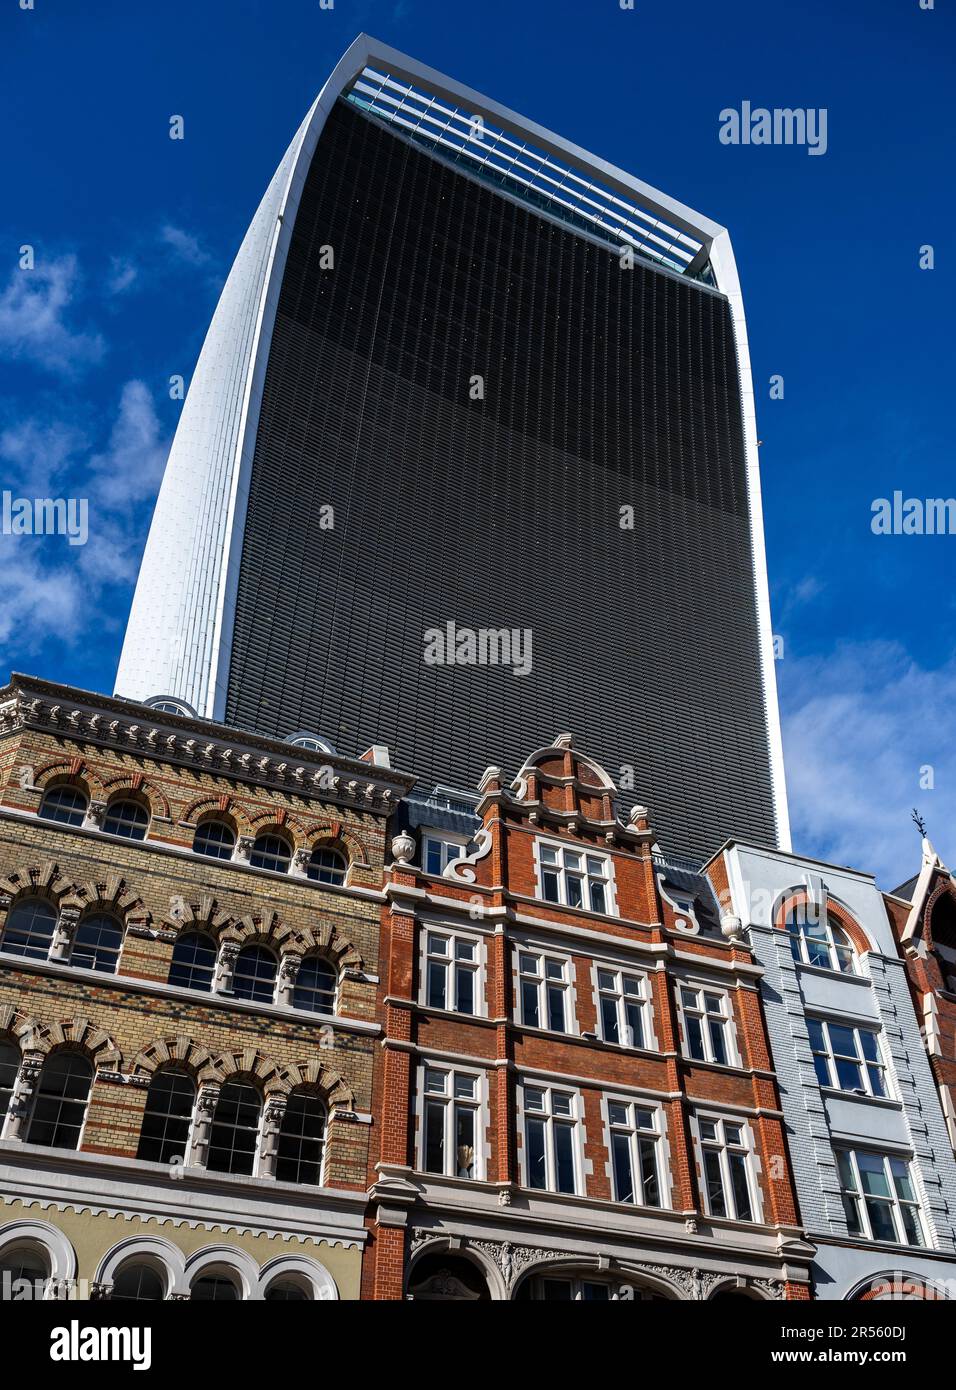 London, UK: The Walkie-Talkie or Fenchurch Building at 20 Fenchurch Street towers over the older buildings below. Buildings of Eastcheap in foreground Stock Photo